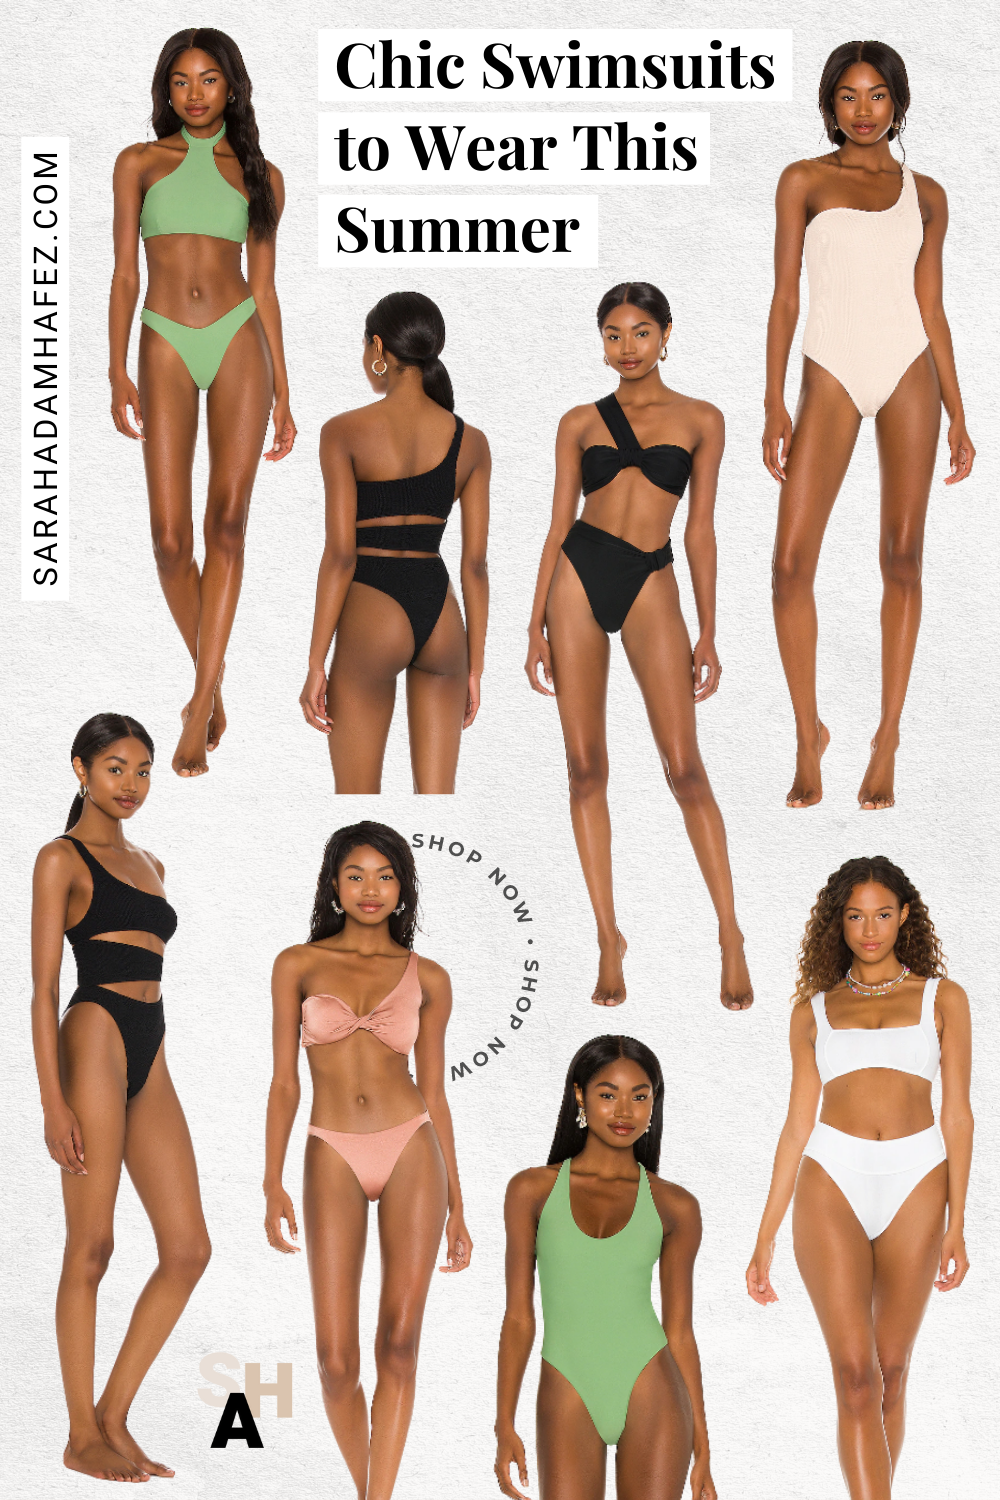 swimsuits for body types, swimsuits 2021 trends,  swimsuits for big busts, swimsuits for older women, swimsuits 2021, sarah adam hafez